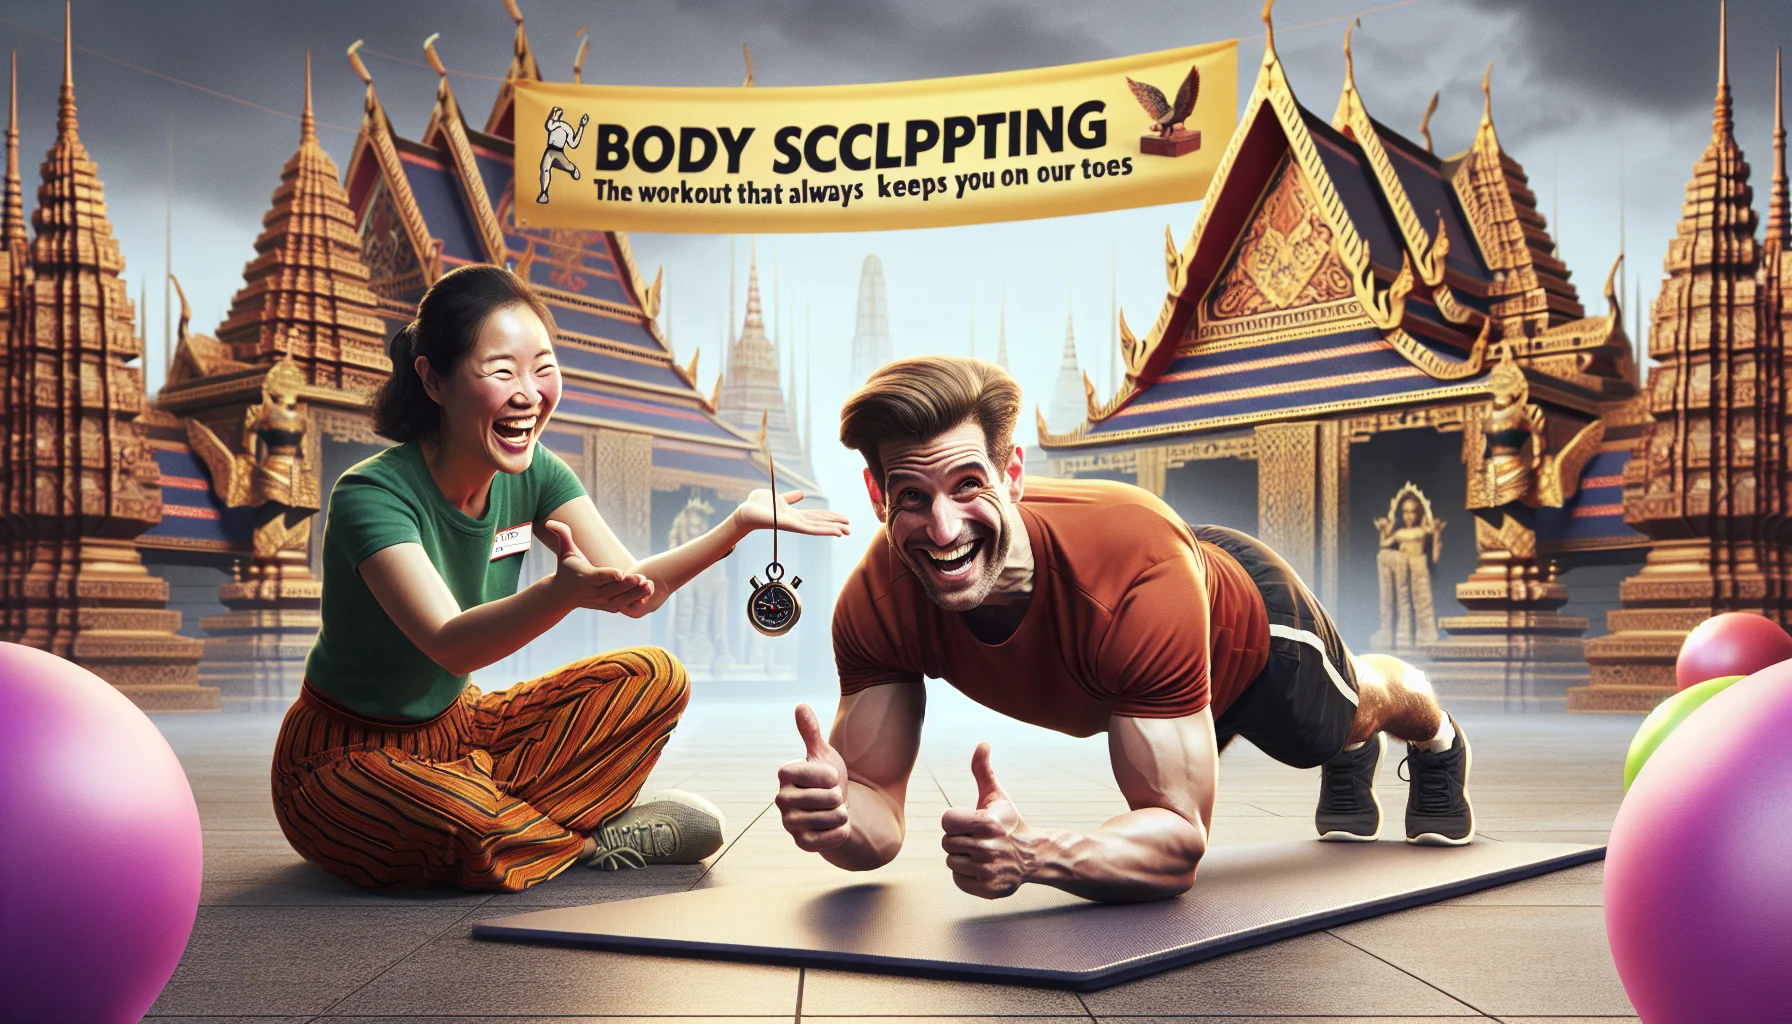 Generate a humorous and realistic image conveying the concept of endurance in body sculpting. Picture a scene involving a jovial gathering in a well-equipped gymnasium. A Caucasian male with muscular arms is over-enthusiastically attempting to hold a seemingly endless plank position on a yoga mat, while an Asian female personal trainer, holding a stopwatch, is laughing and encouraging him with a thumbs-up gesture. A banner on the wall humorously proclaims, 'Body Sculpting: The Workout That Always Keeps You on Your Toes'. This scene should inspire viewers to embrace regular exercise and endurance training humorously.